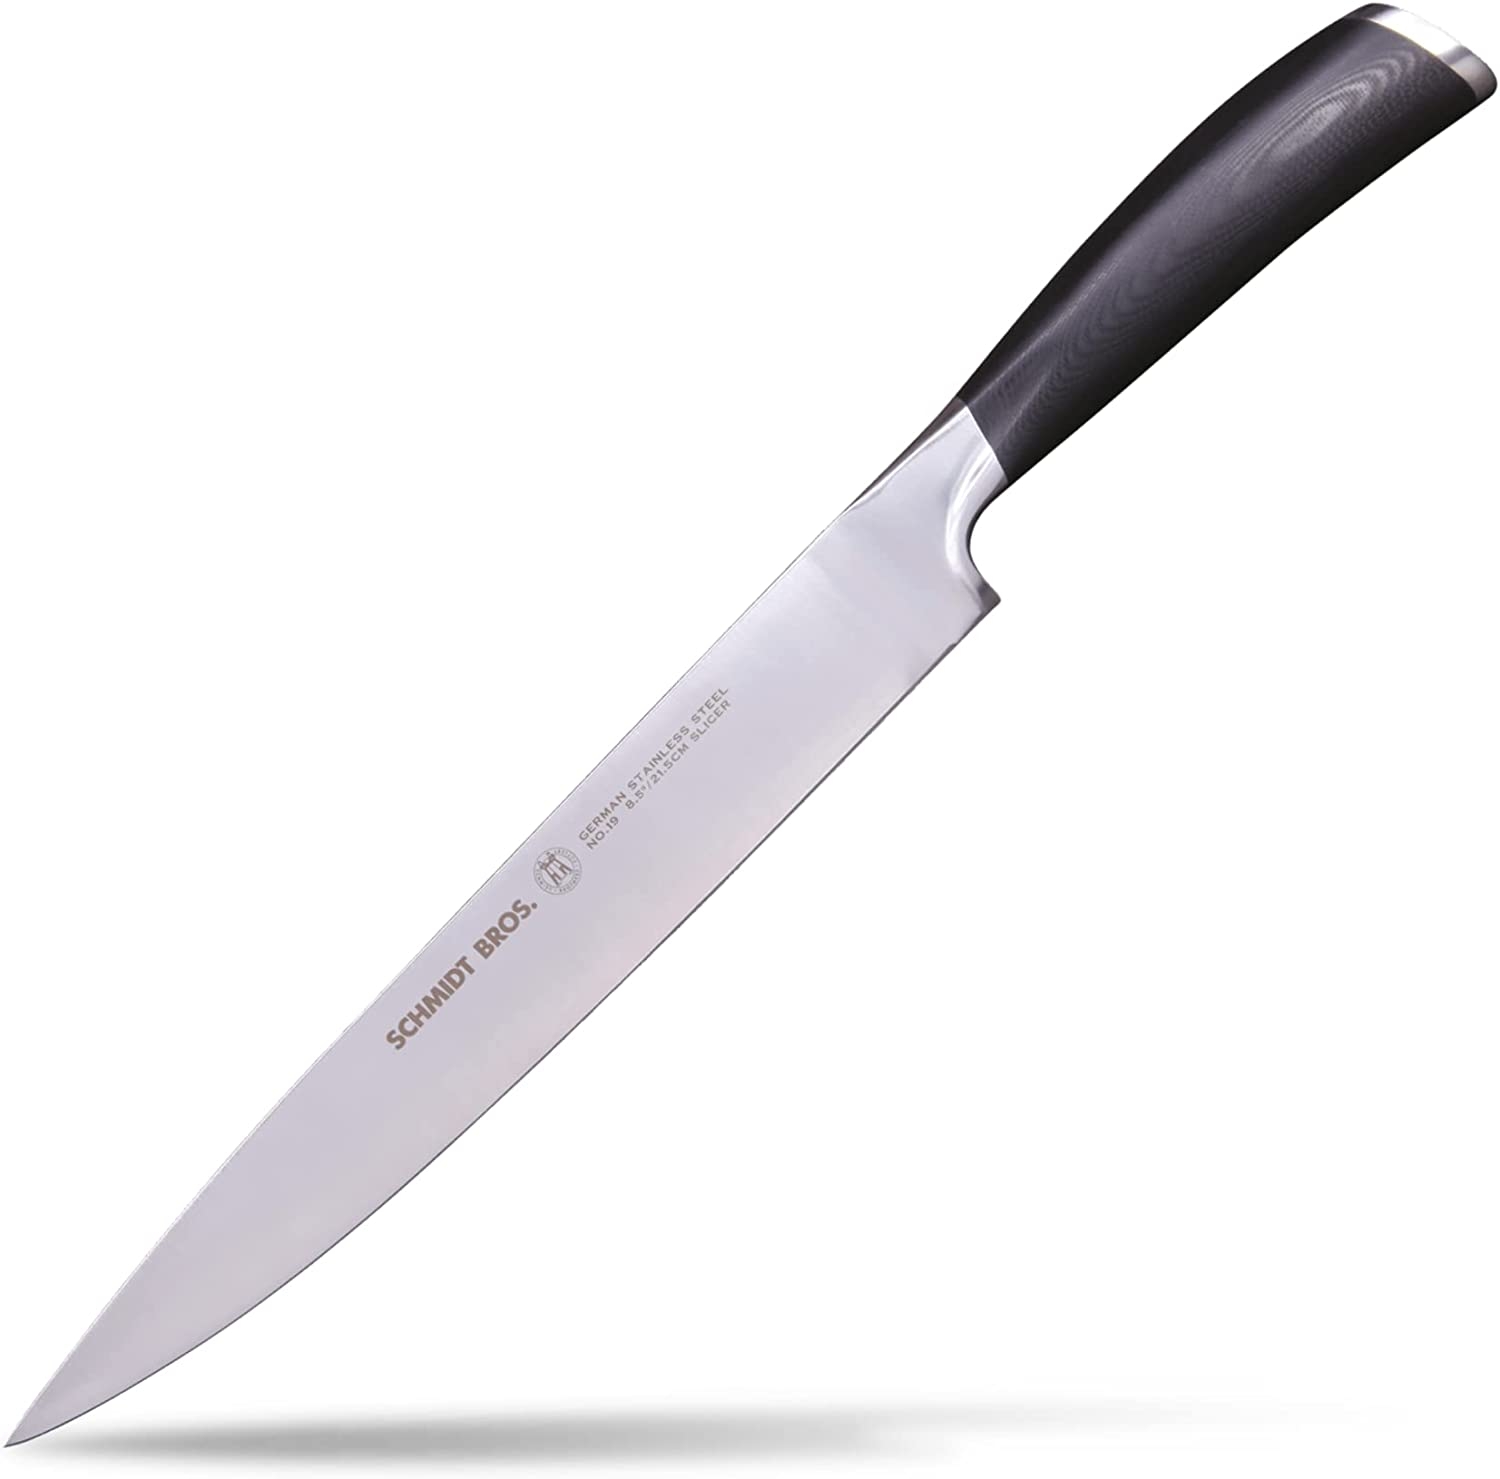 Schmidt Bros. Cutlery Heritage Series, 8.5-Inch Carving Knife Import To Shop ×Product customization General Description Gallery